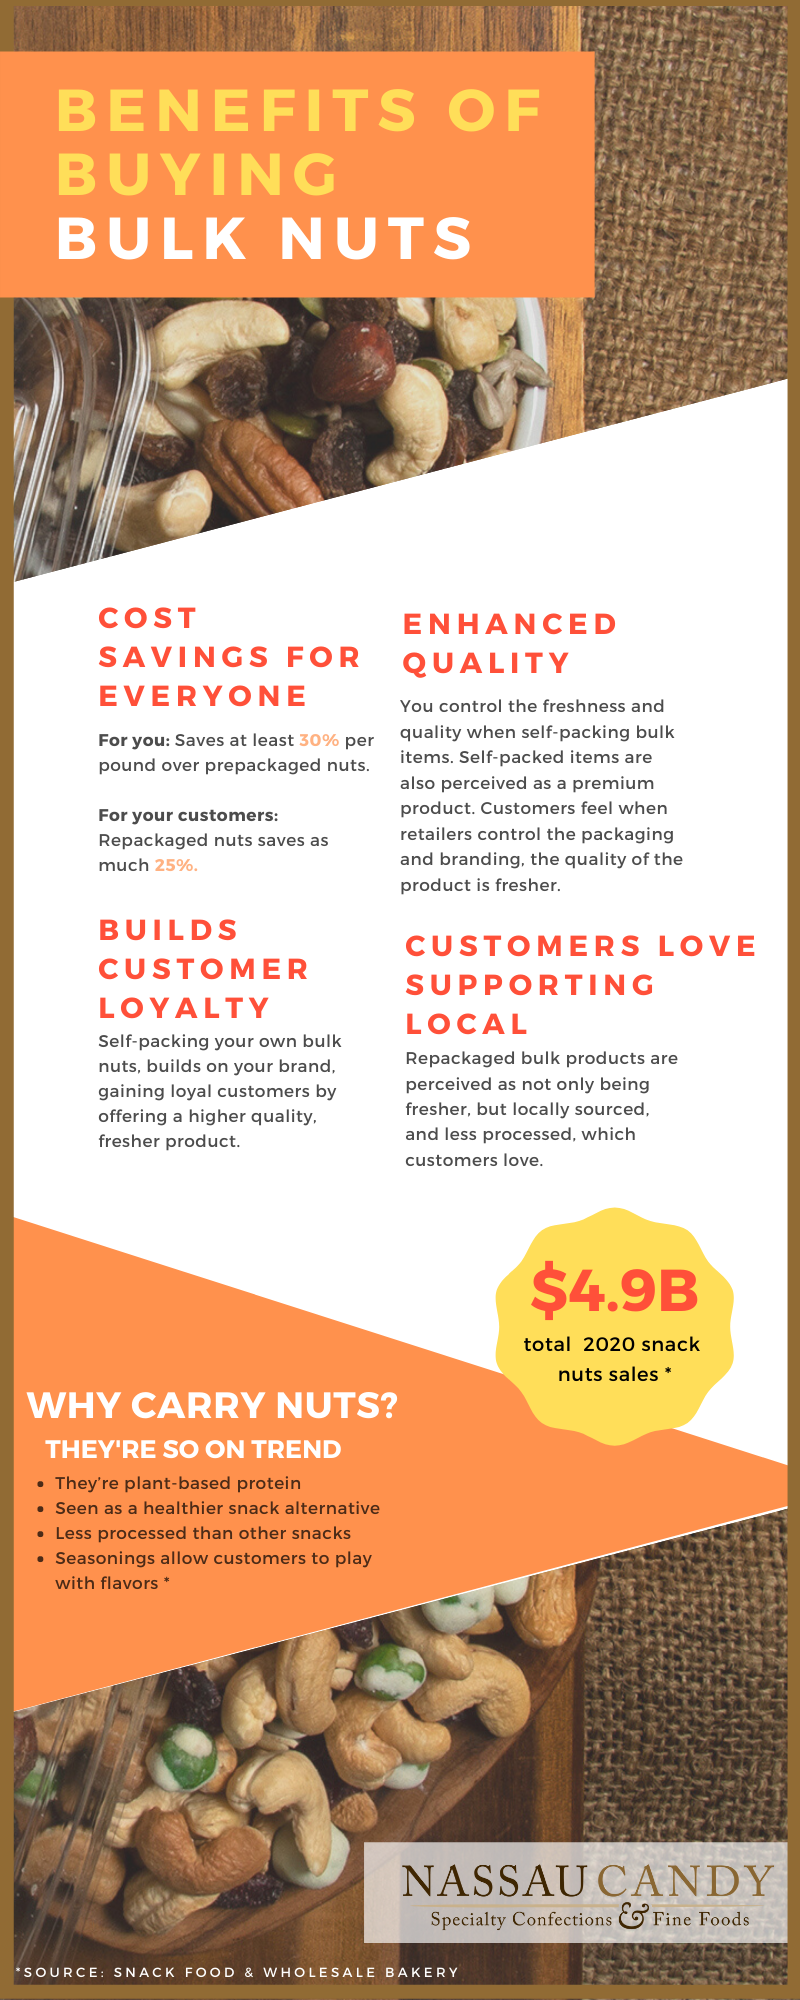 infographic, bulk nuts, benefits of buying bulk nuts, retail tips